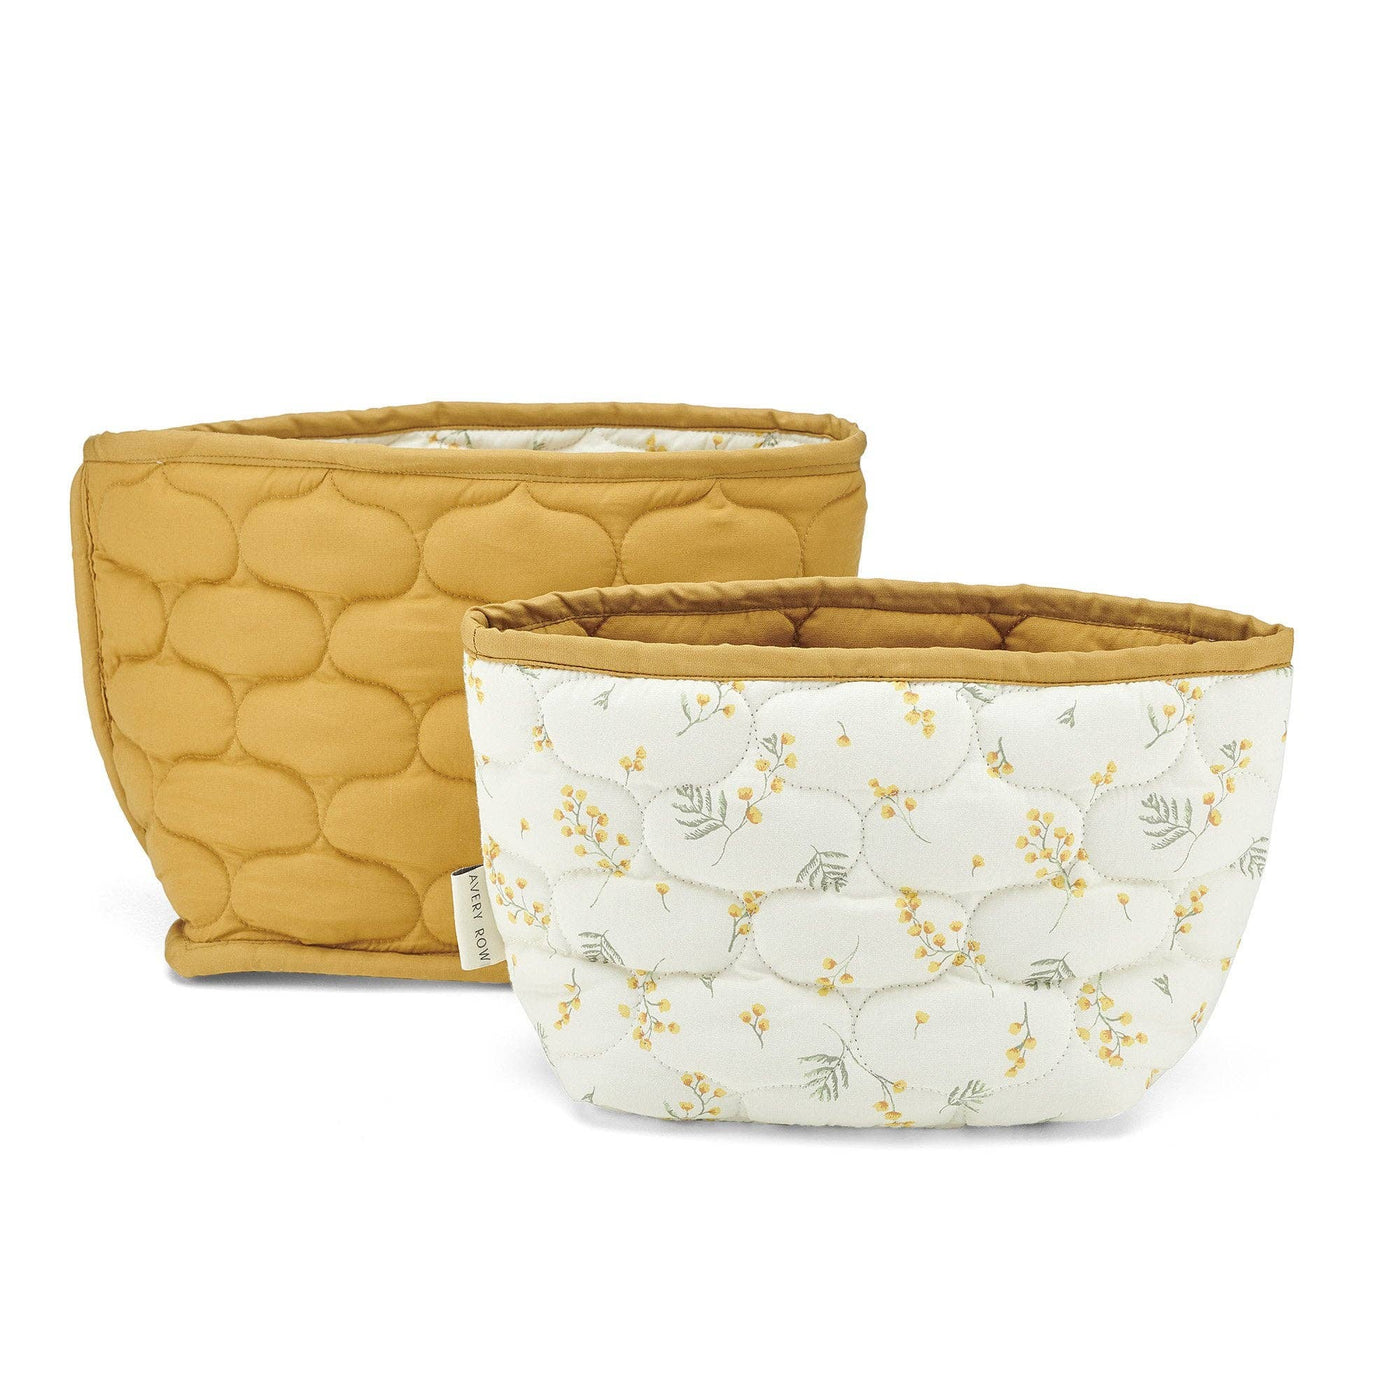 Small Quilted Storage Baskets Set Of 2 - Mimosa - Organic Cotton